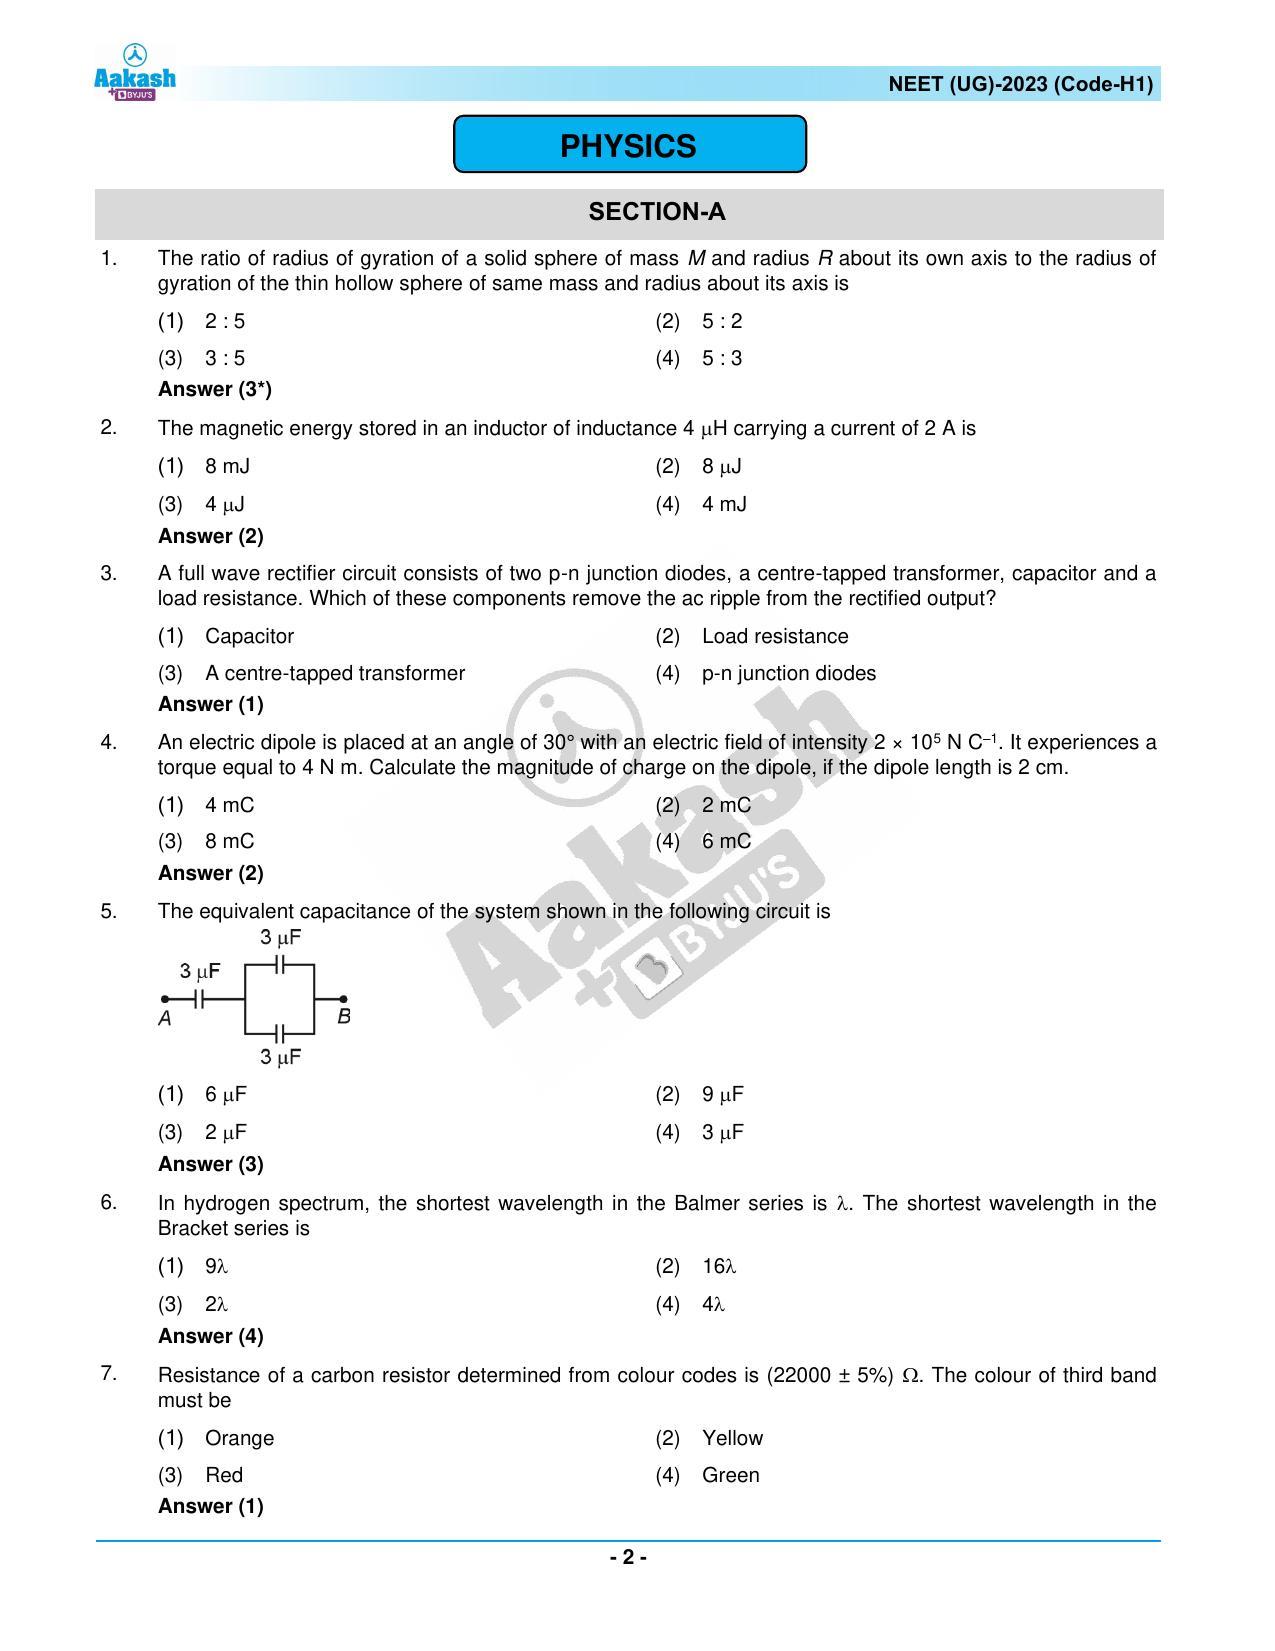 NEET 2023 Question Paper H1 - Page 2